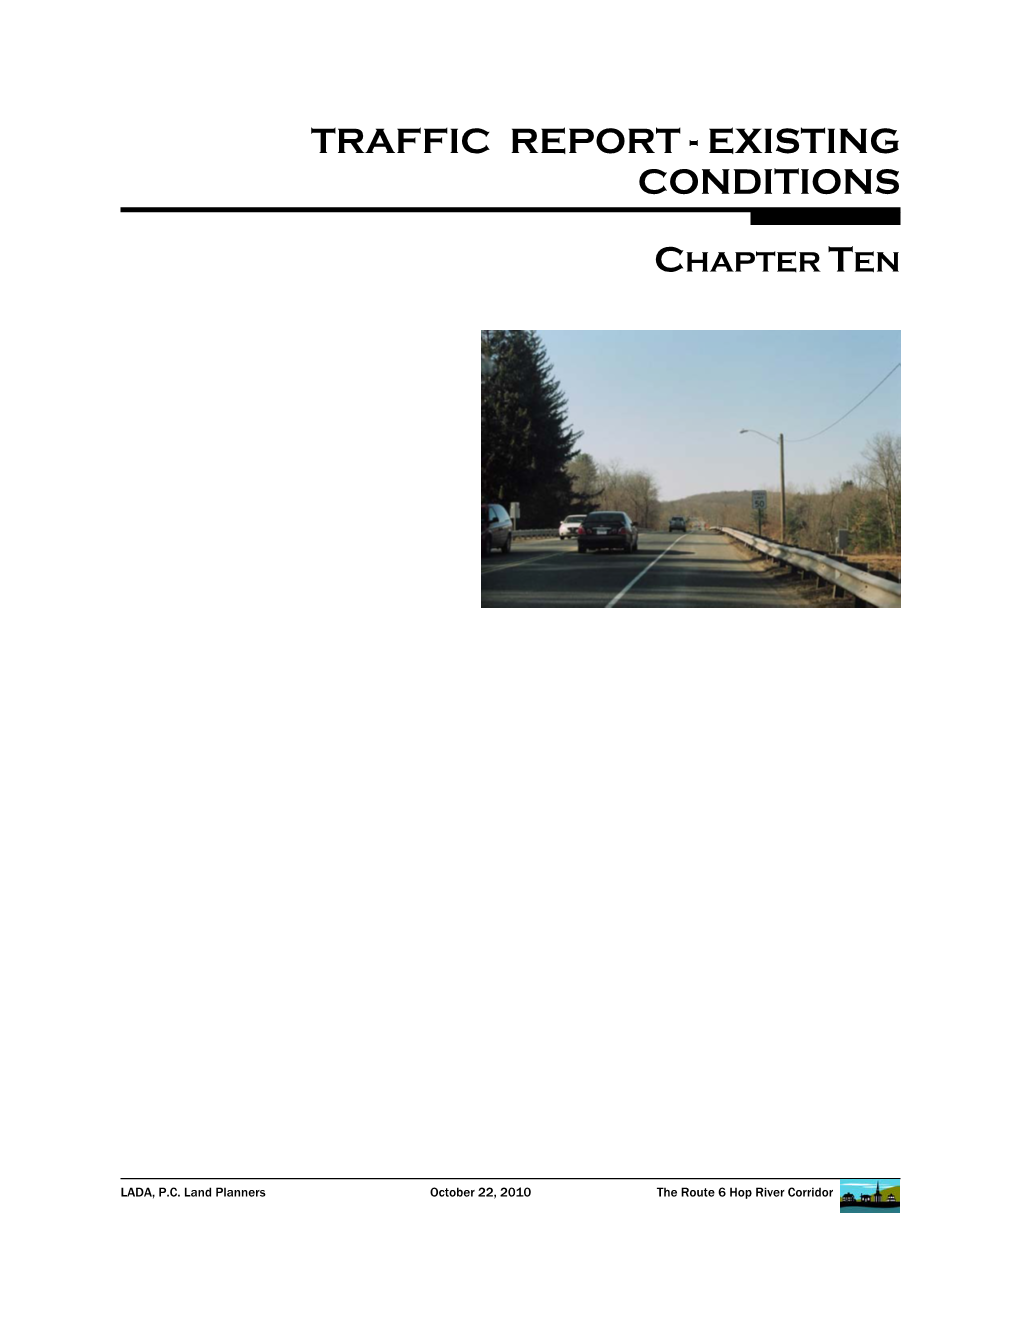 Traffic Report - Existing Conditions